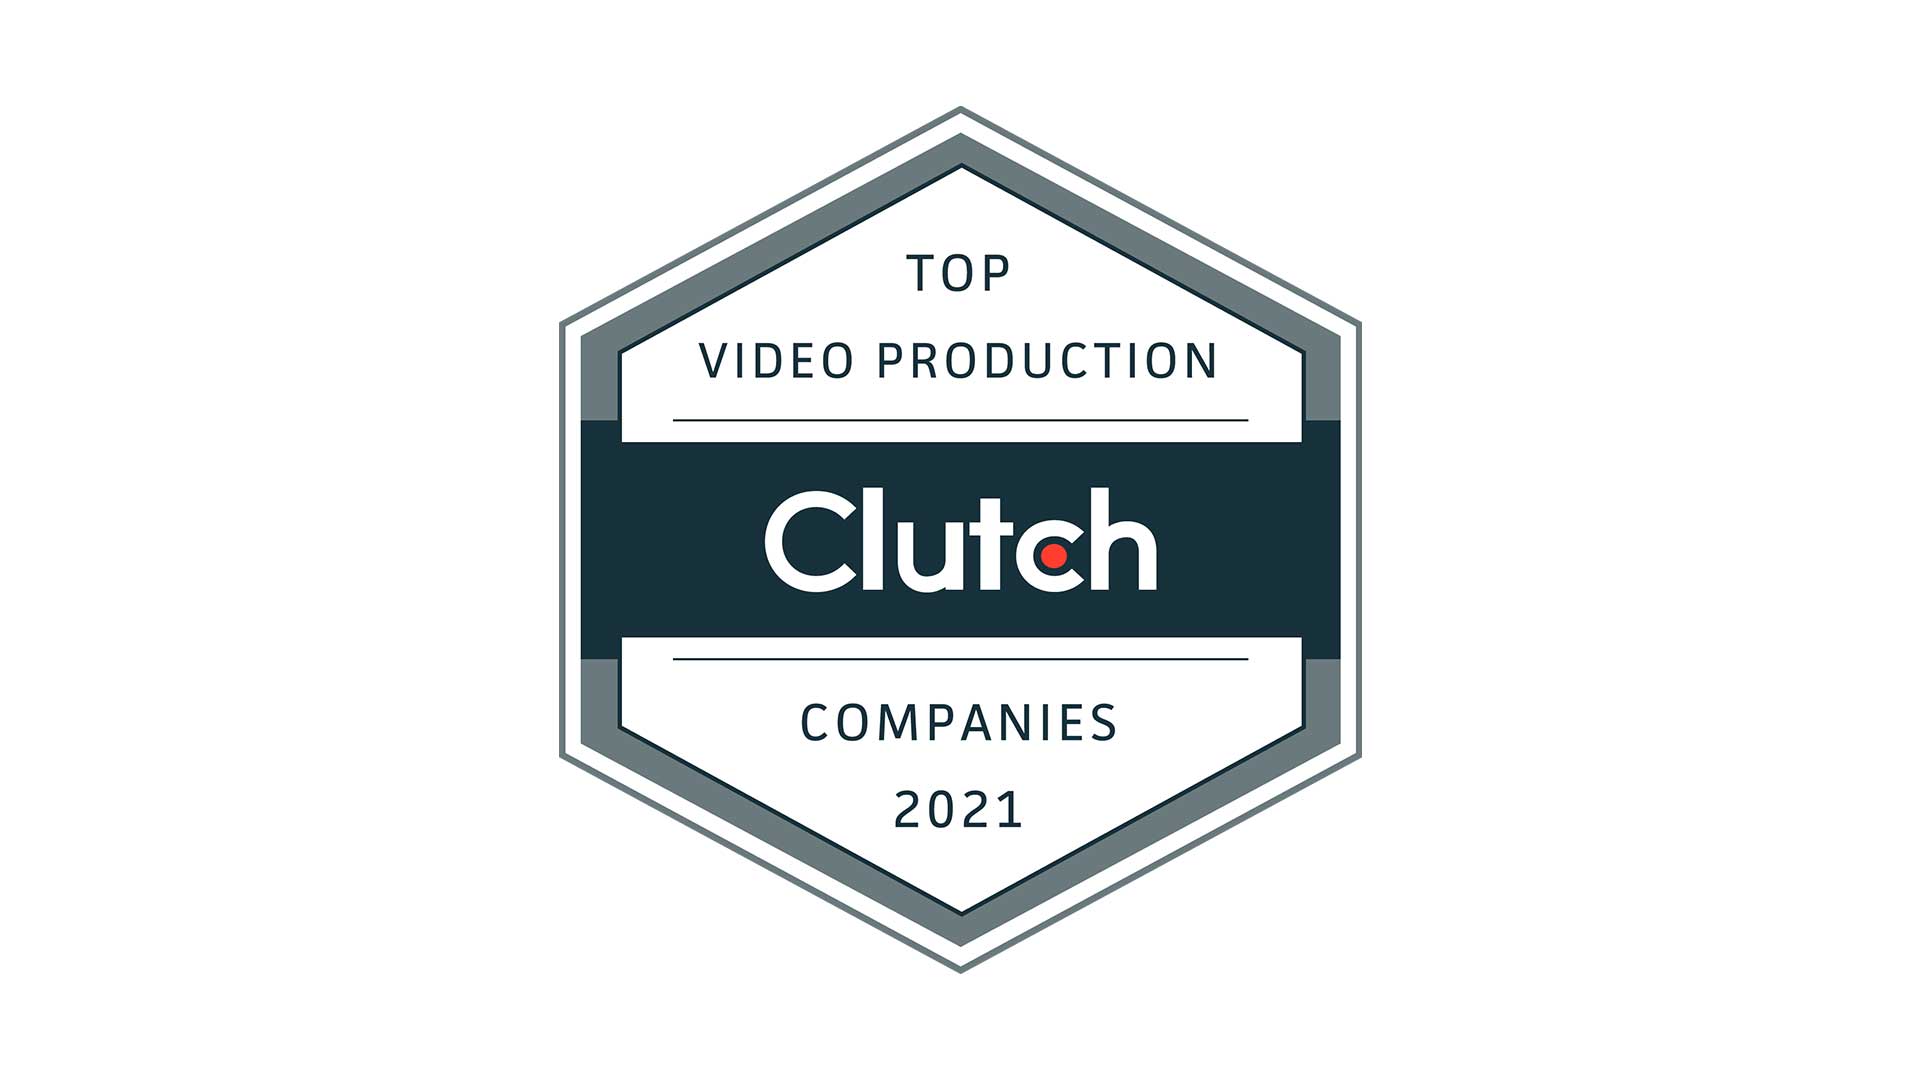 Clutch Top Video Production Companies Award 2021